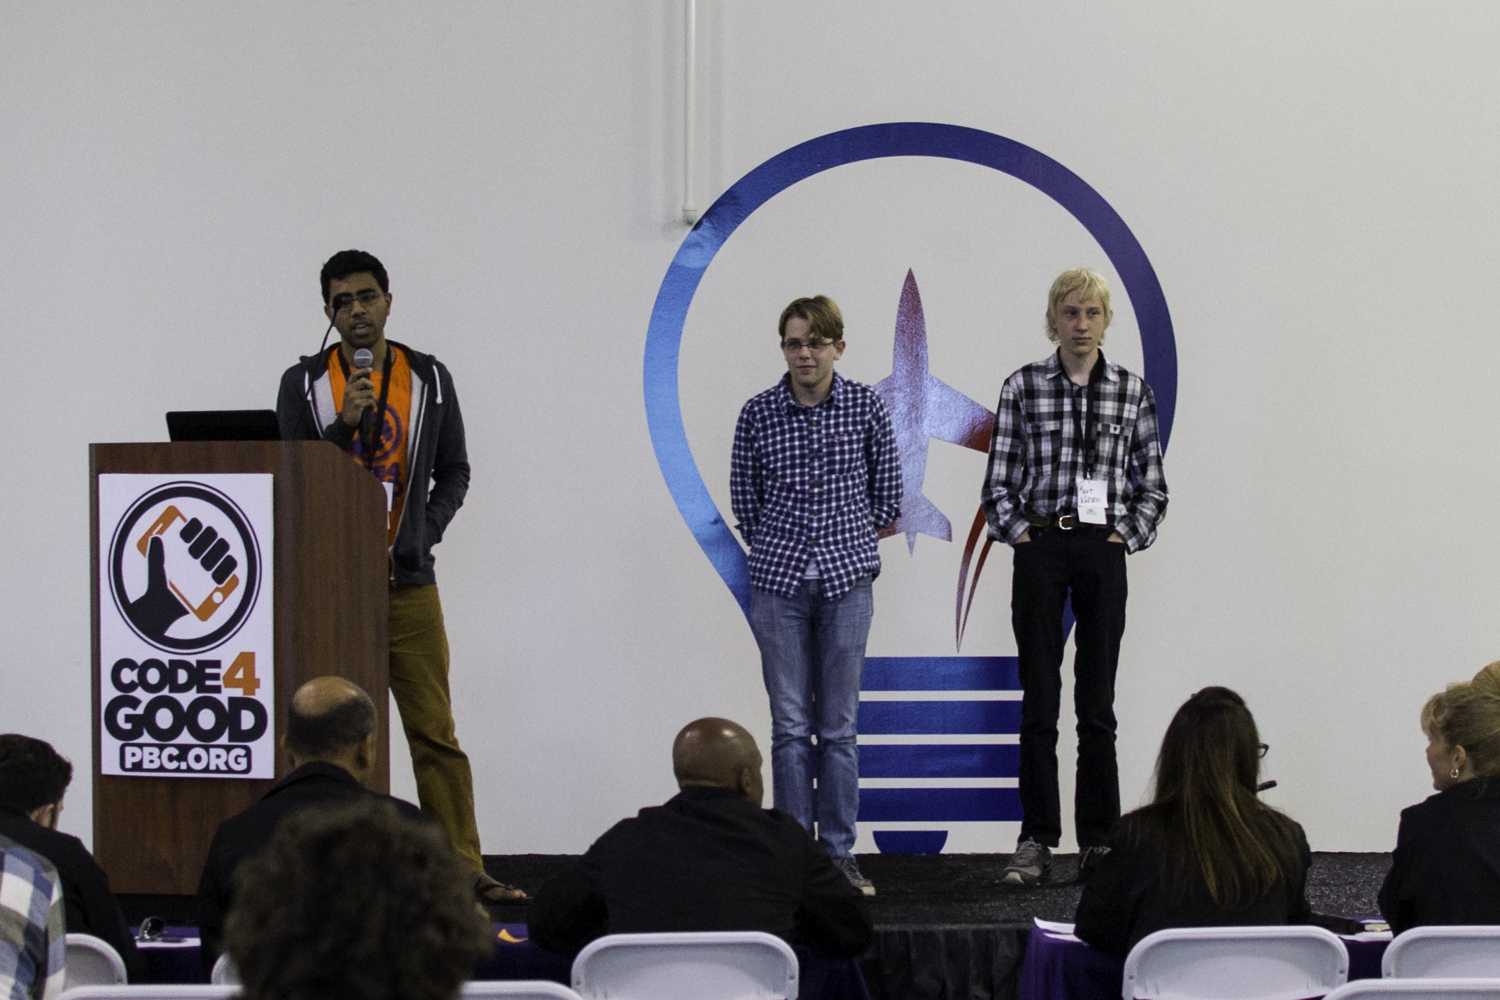 First place winners: Aton, Rohan, and Kurt team “TechGarage” give their 5 minute presentation to the judges. Photo by Alexis Hayward | Web Assistant 